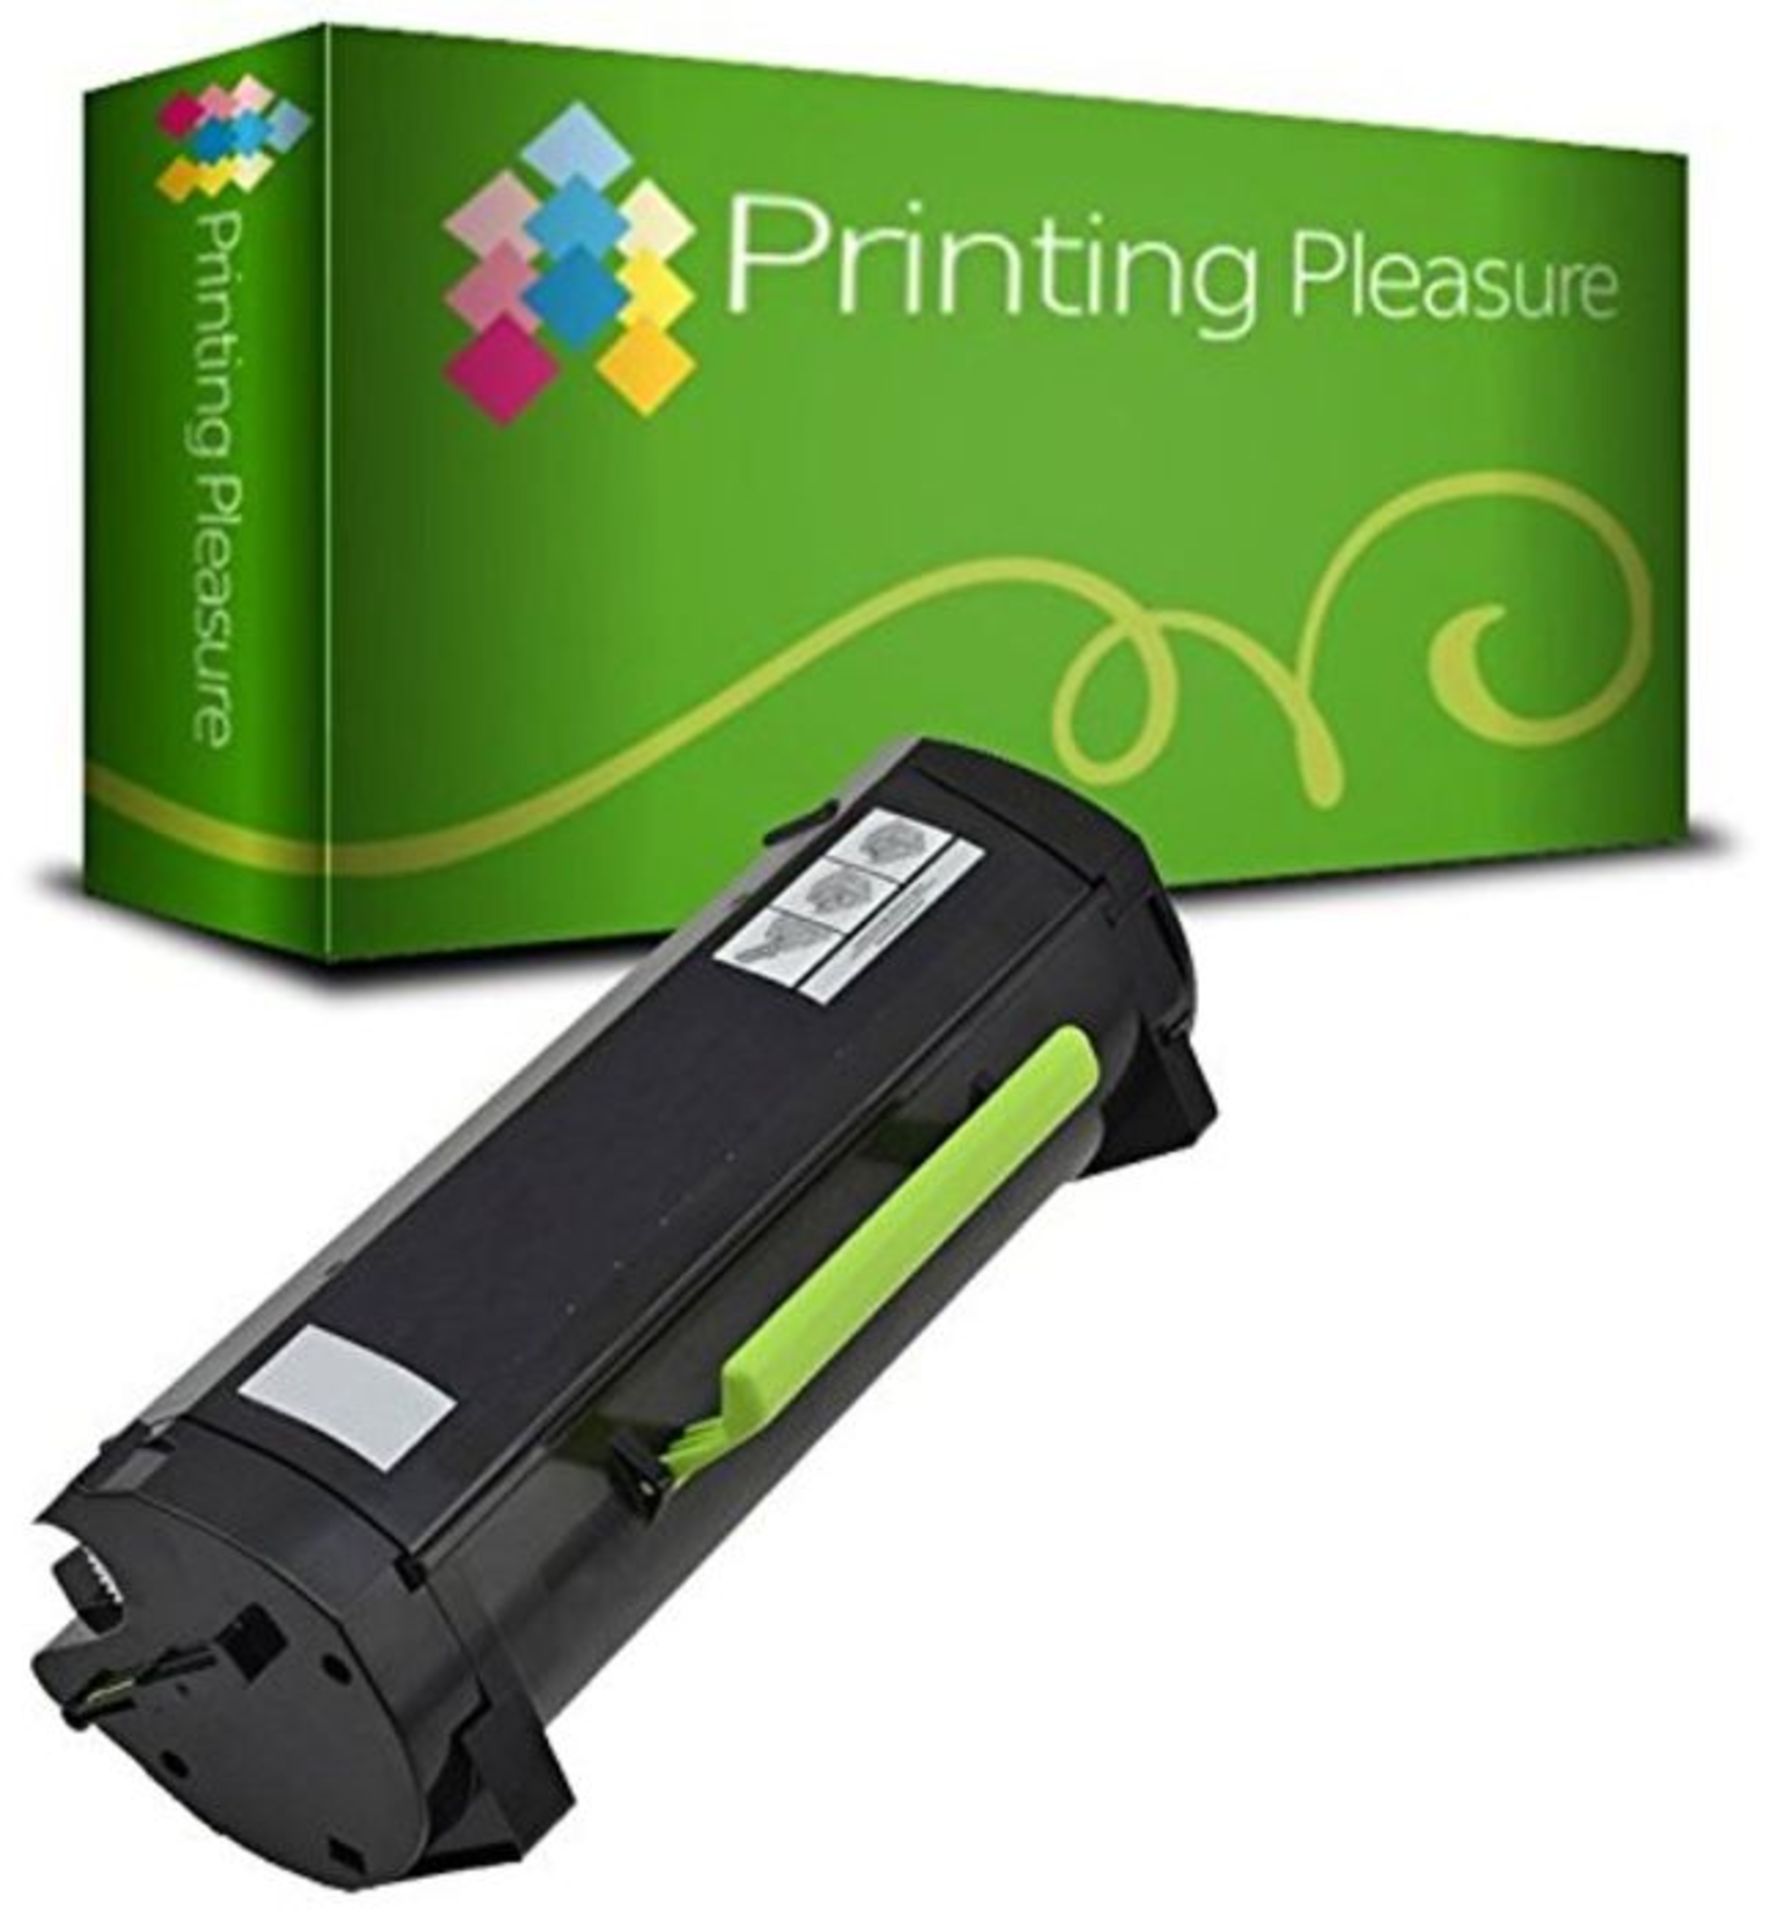 Compatible Toner Cartridge for Lexmark MS310D MS310DN MS312DN - Black, High Yield